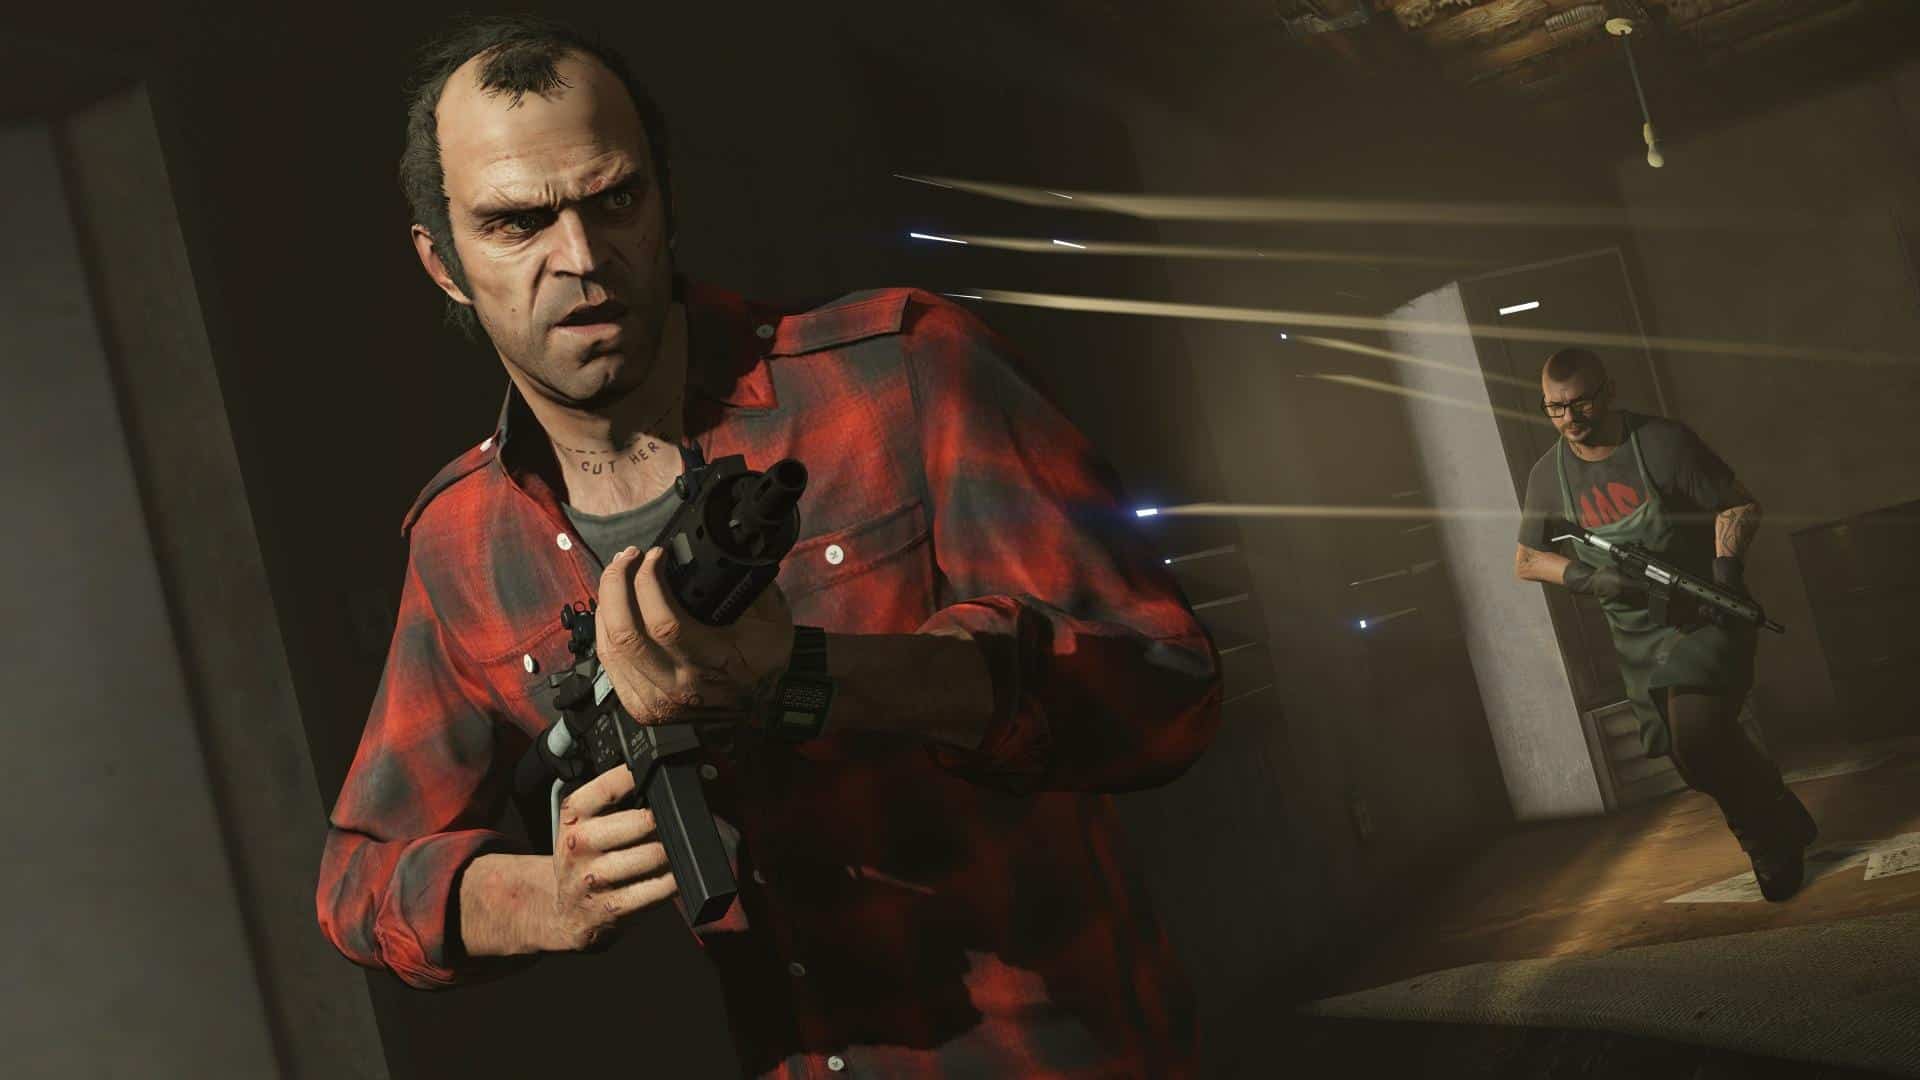 Grand Theft Auto Online launches October 1st with MMO-like elements (video)